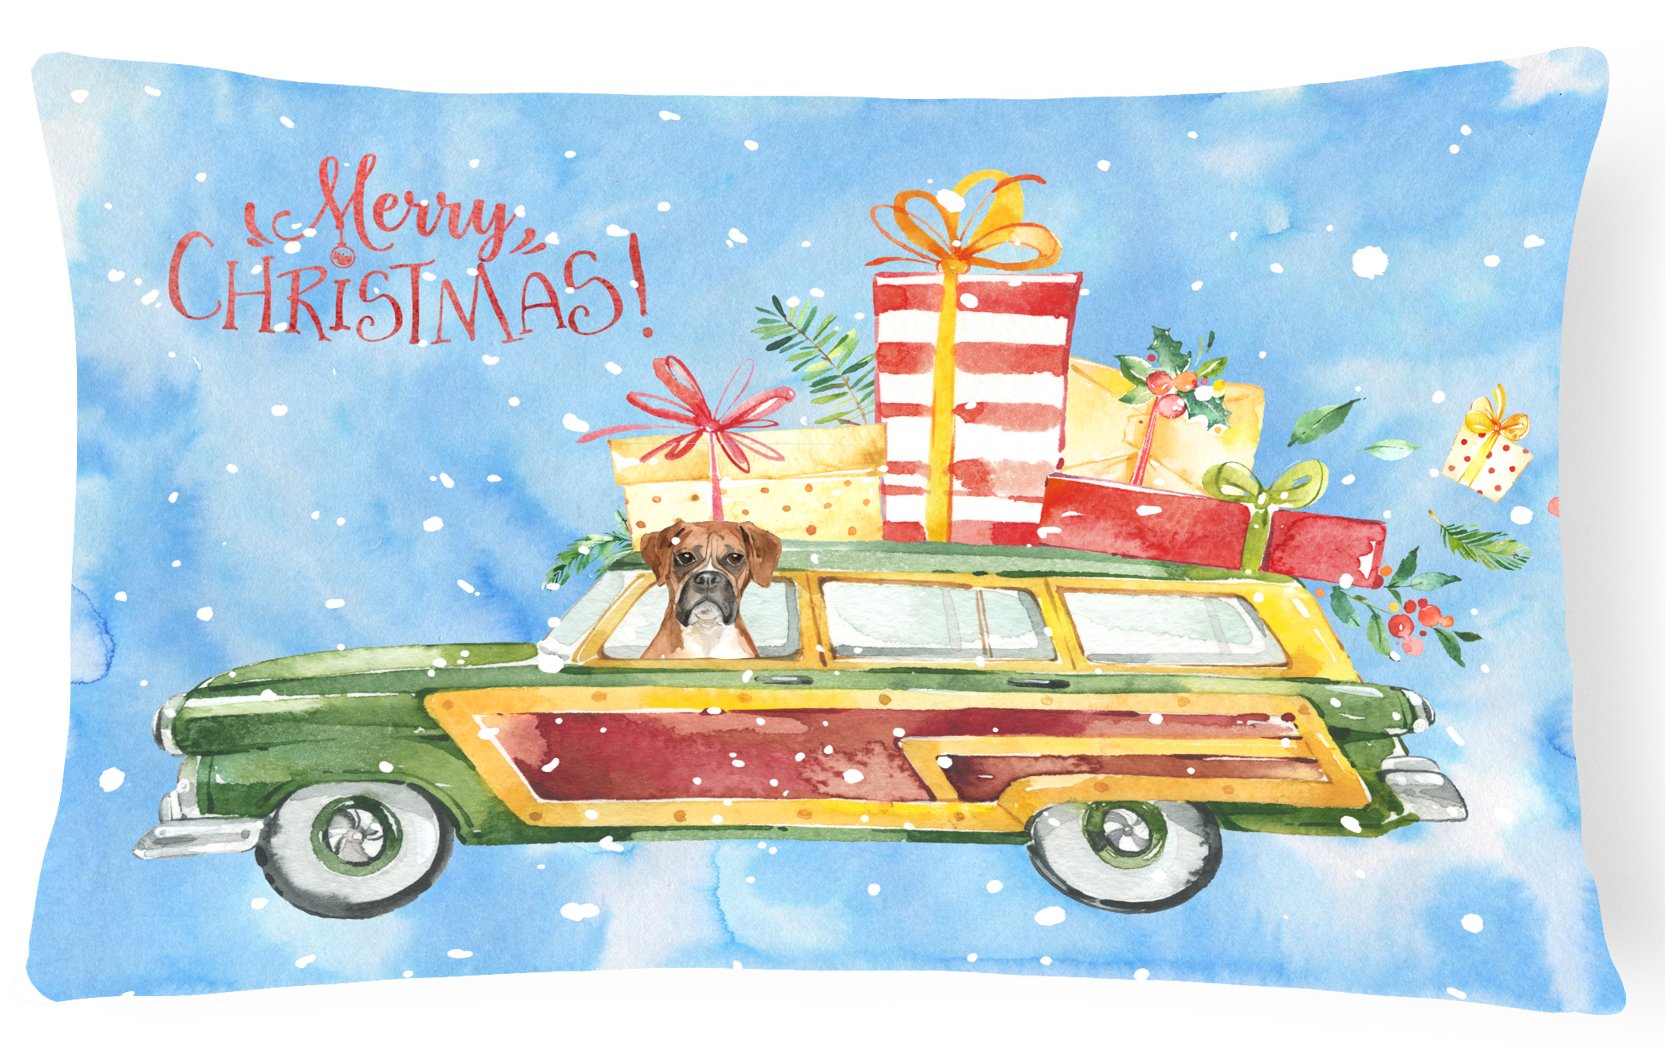 Merry Christmas Boxer Canvas Fabric Decorative Pillow CK2399PW1216 by Caroline's Treasures